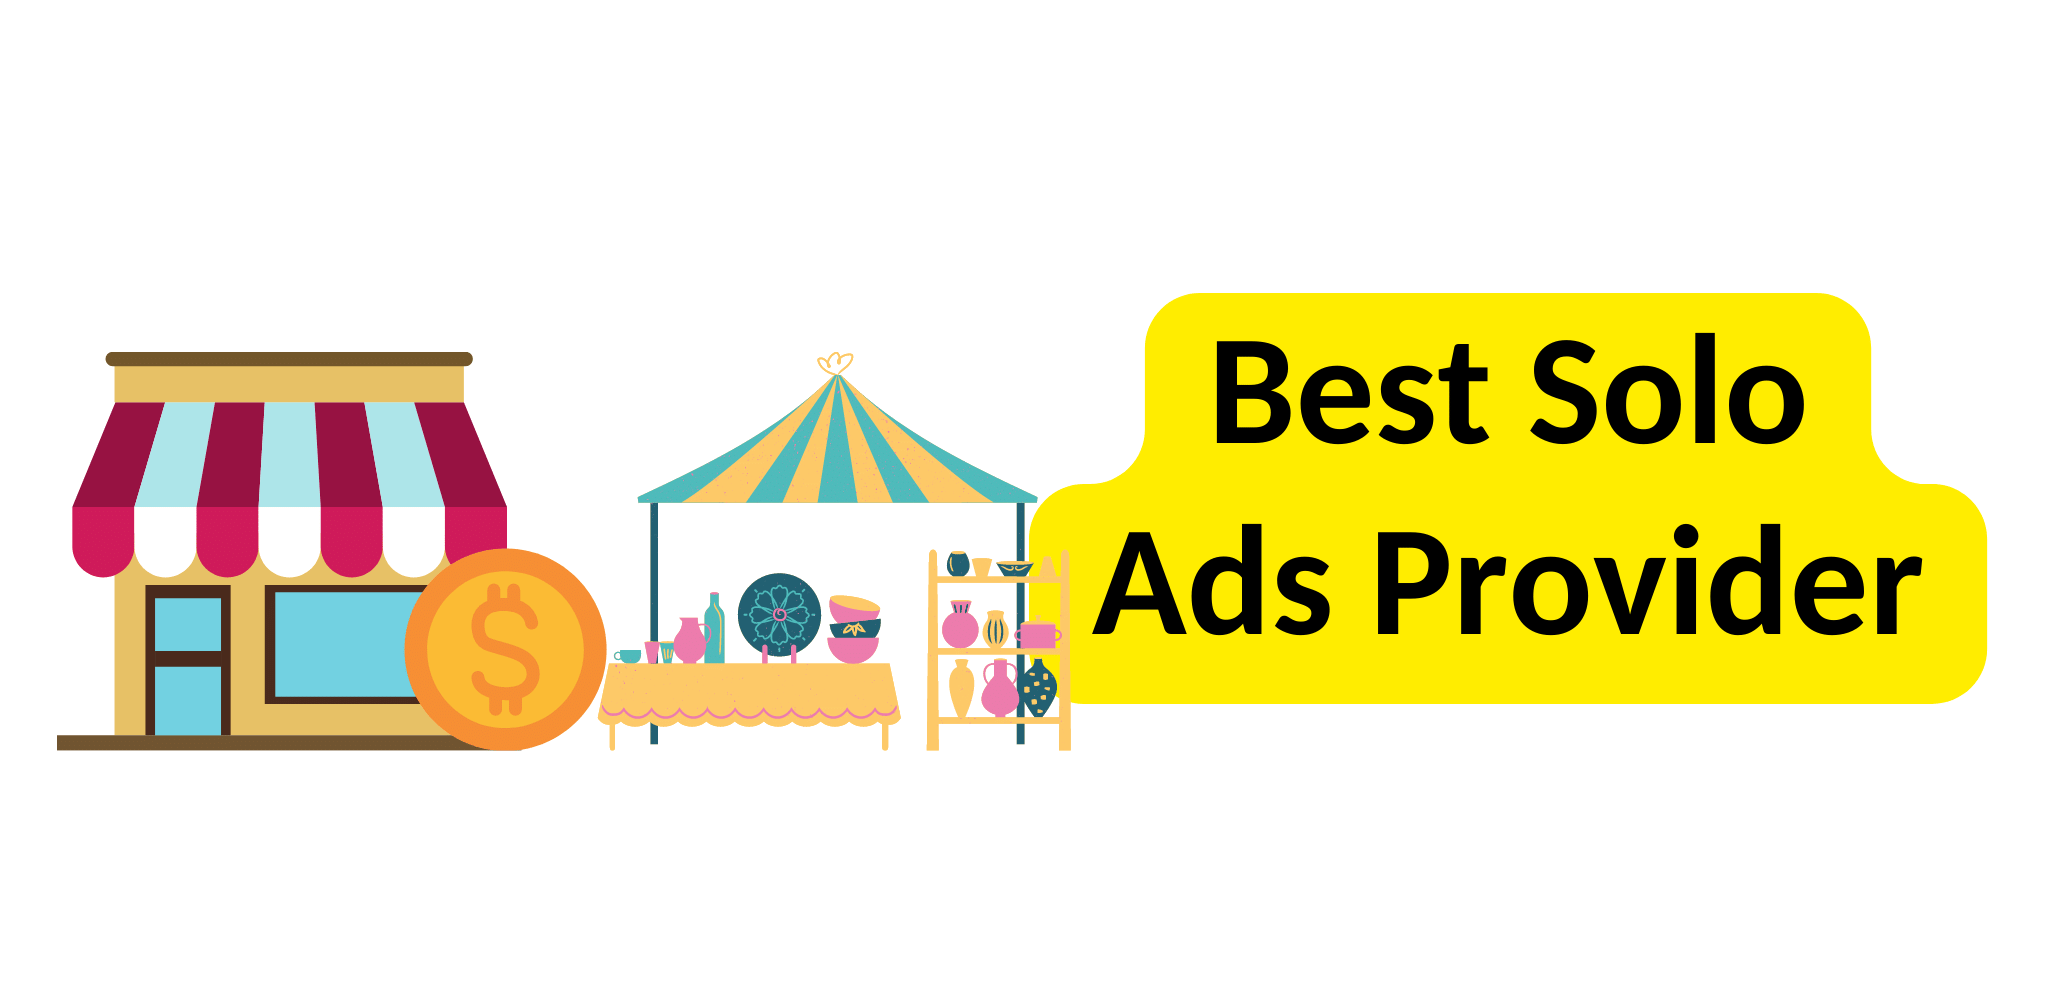 Best Solo Ads Provider